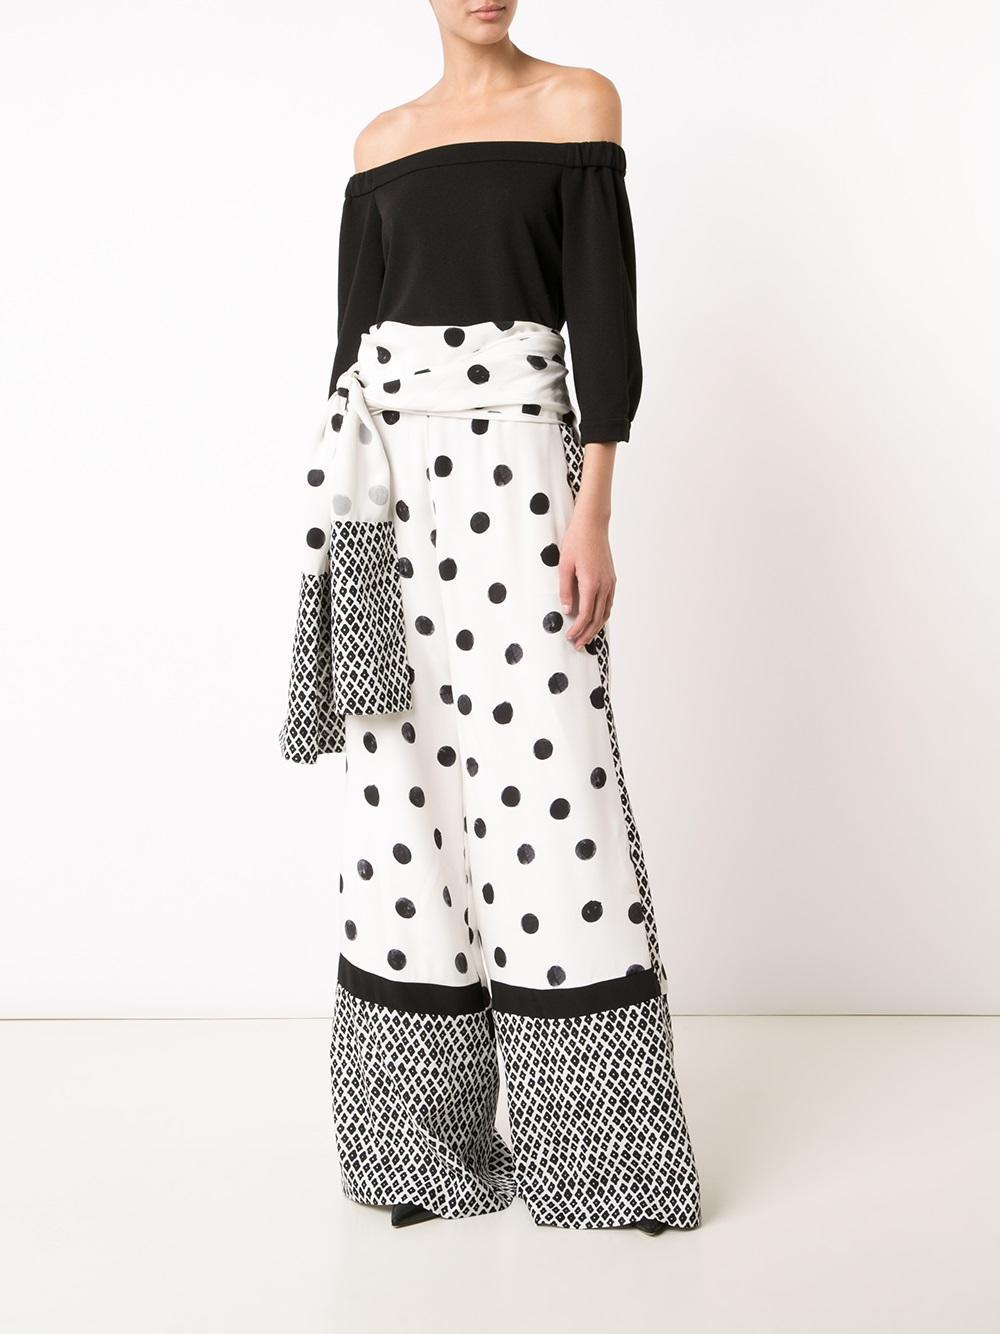 OSCAR DE LA RENTA dress pants come in cream and black paint effect polka dot print silk satin with an extreme wide leg, patterned hem  and stripe panels, and side sash tie's waist detail. Circa 2017. Made in Italy.
 
Marked: 8
 
Measurements:
